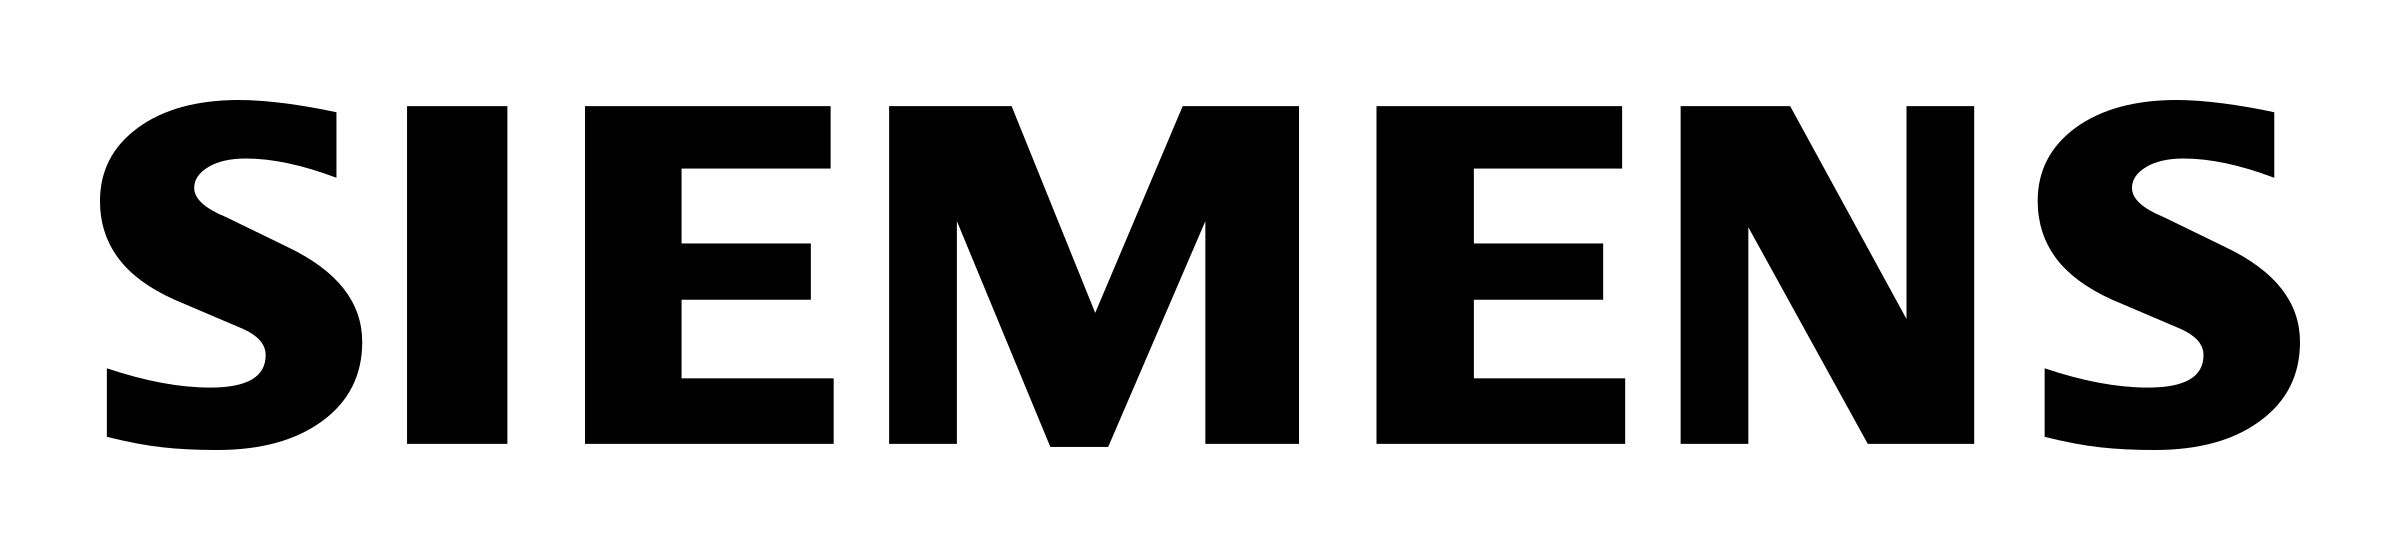 siemens-logo-black-and-white.png